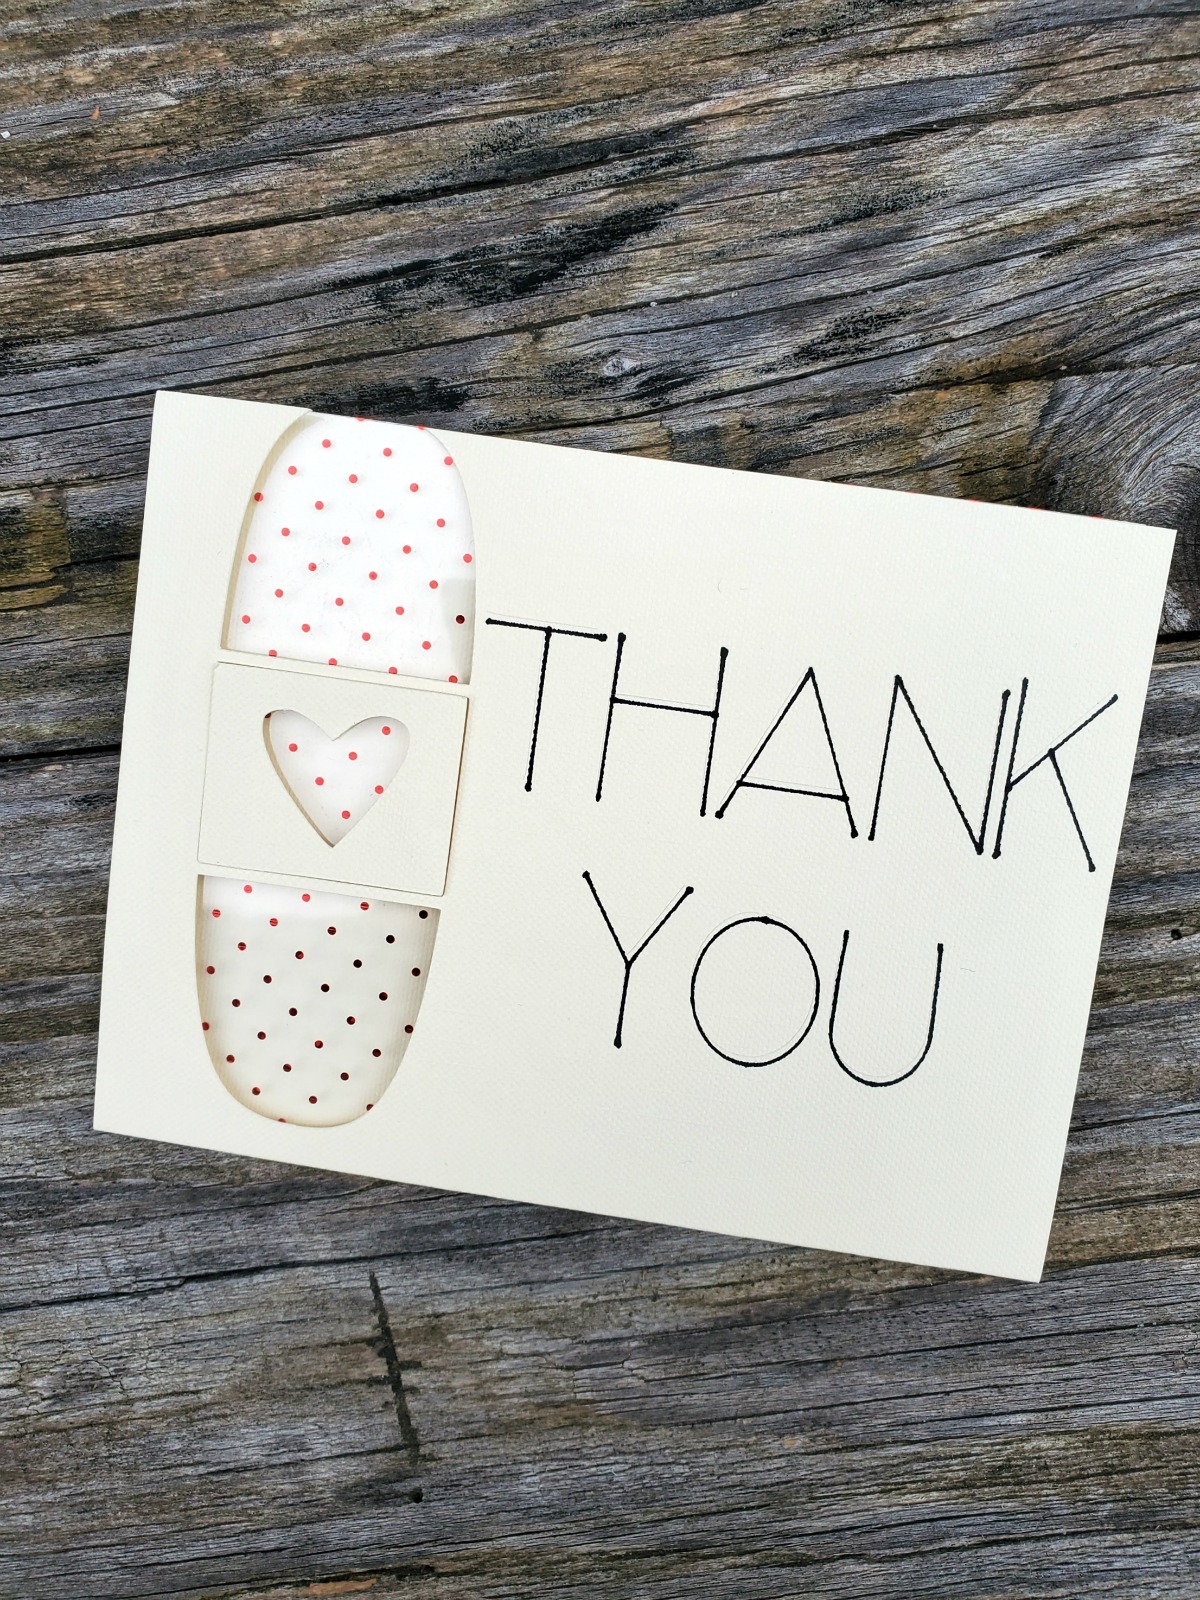 How to Make Thank You Cards with the Cricut Joy